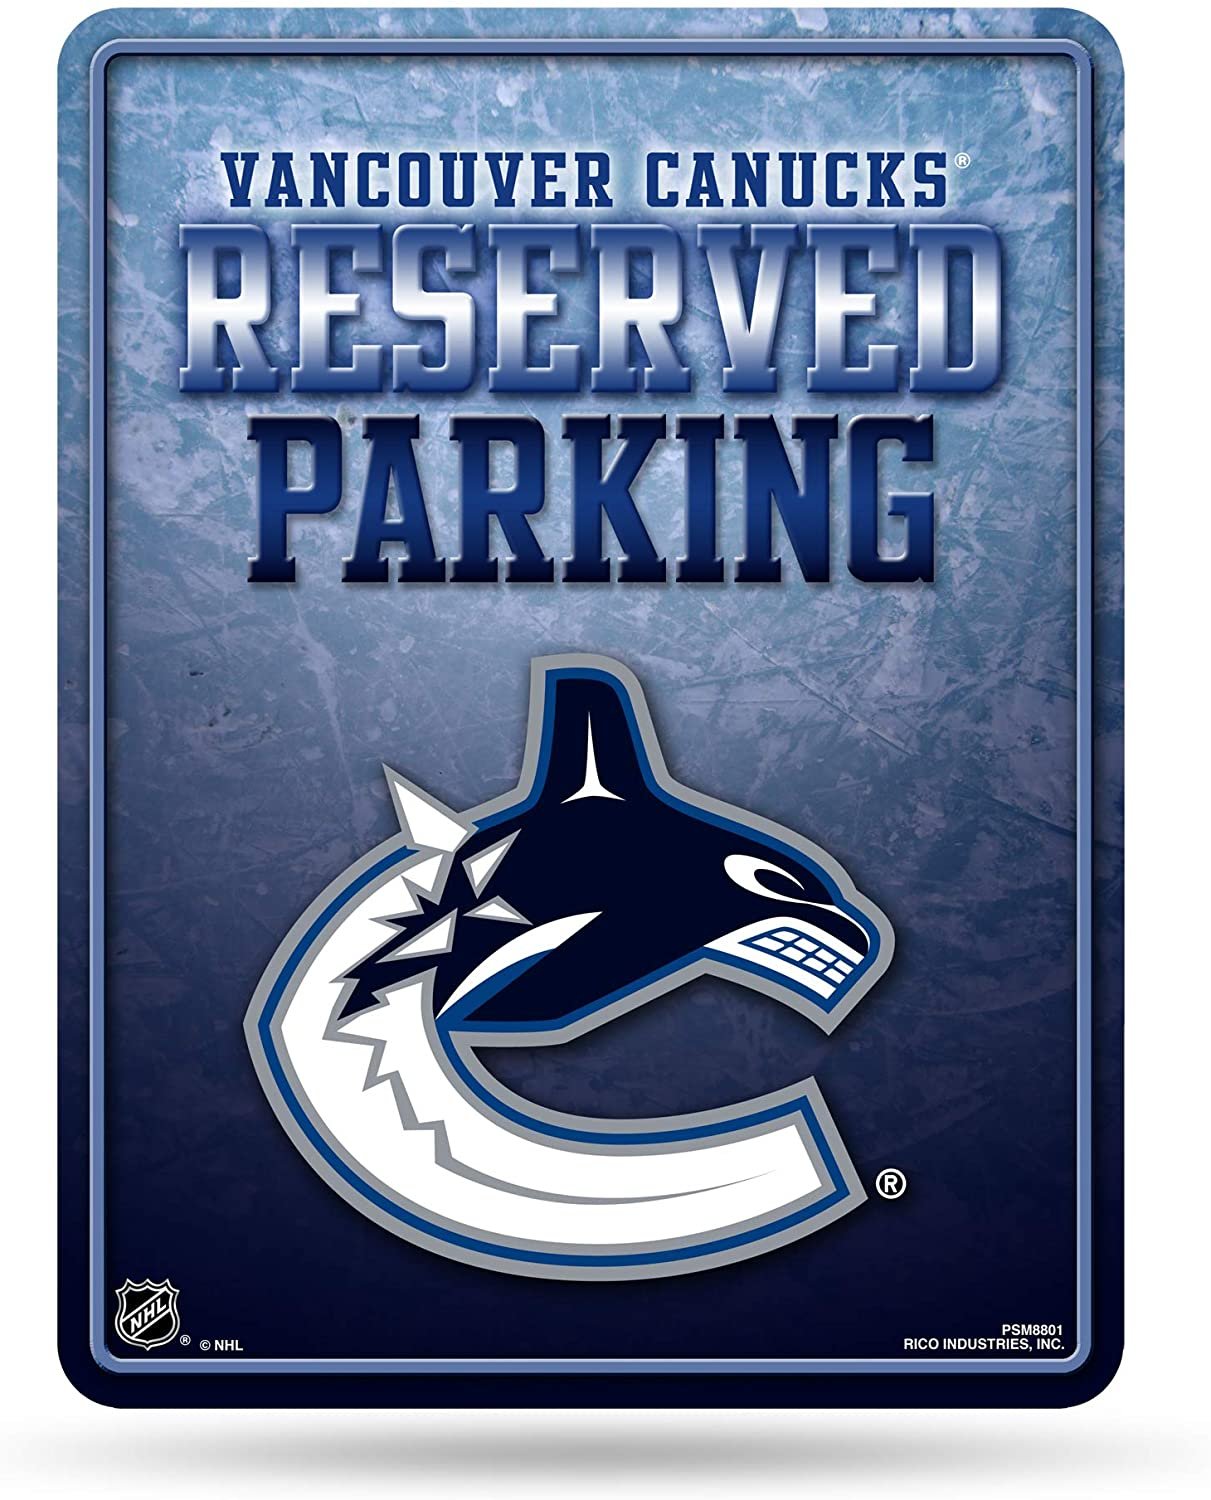 Vancouver Canucks 8-Inch by 11-Inch Metal Parking Sign Décor